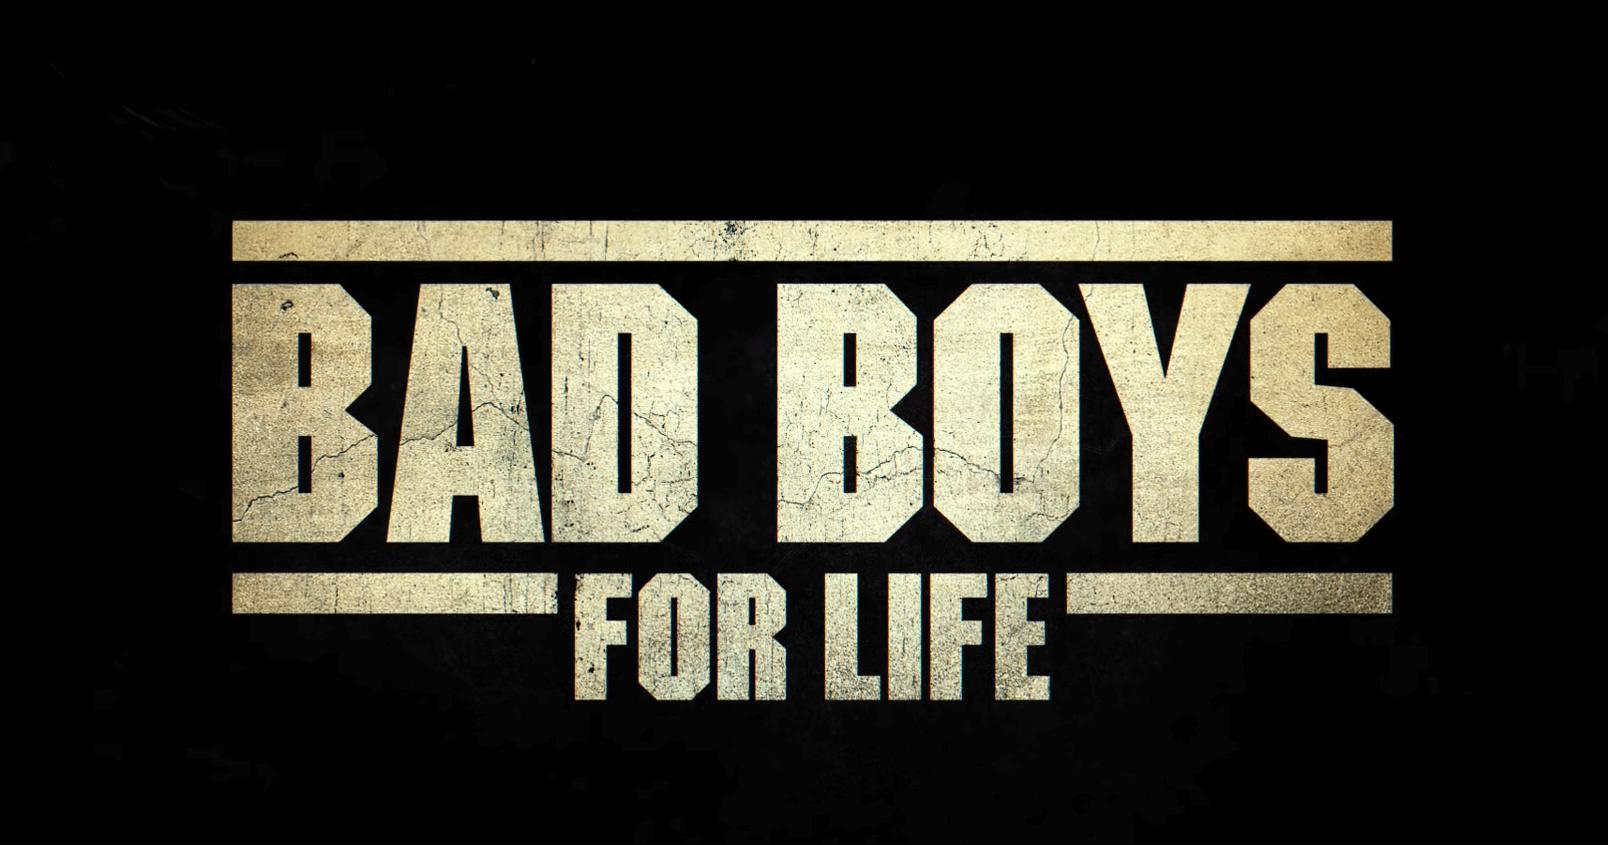 Download Bad Boys for Life Full Movie HD For Free on Tamilrockers 2020